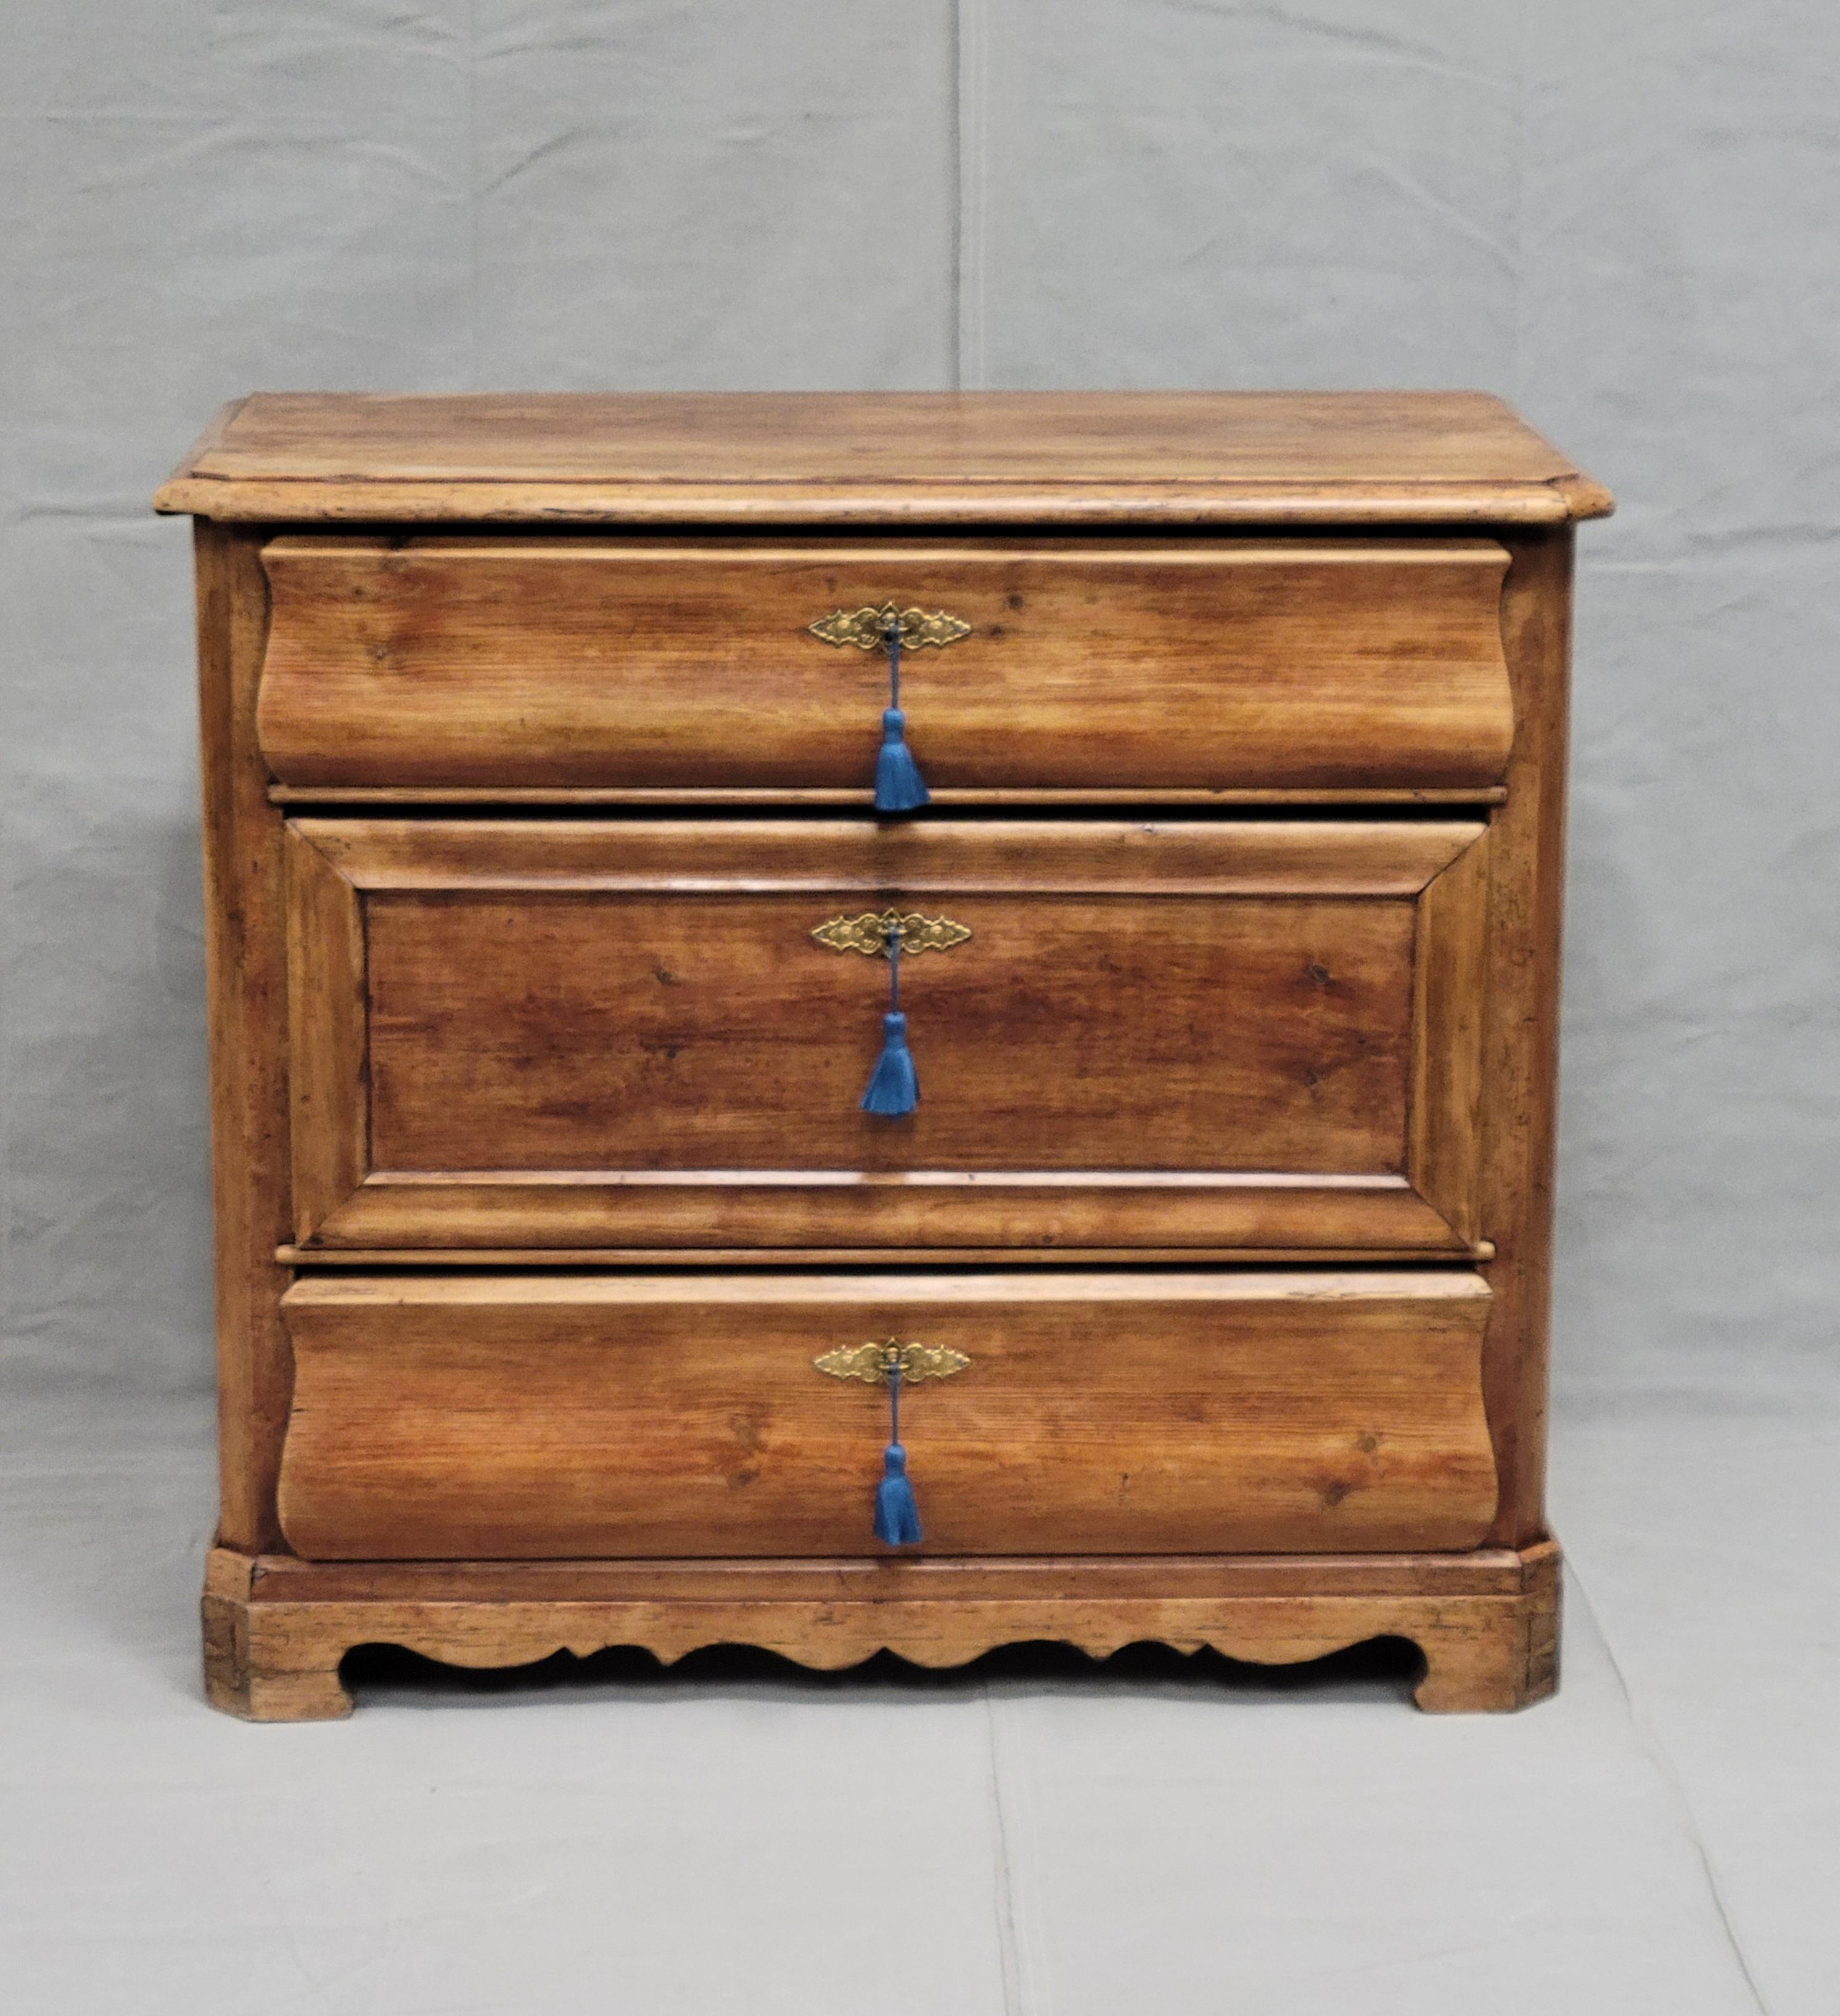 This beautiful Swedish or Danish antique chest of drawers was beautifully crafted out of pine in the early or mid-1800s. Note the beautiful and expert 45 degree angle wood joinery at the top and base corners, as well as dovetails on the drawers. The